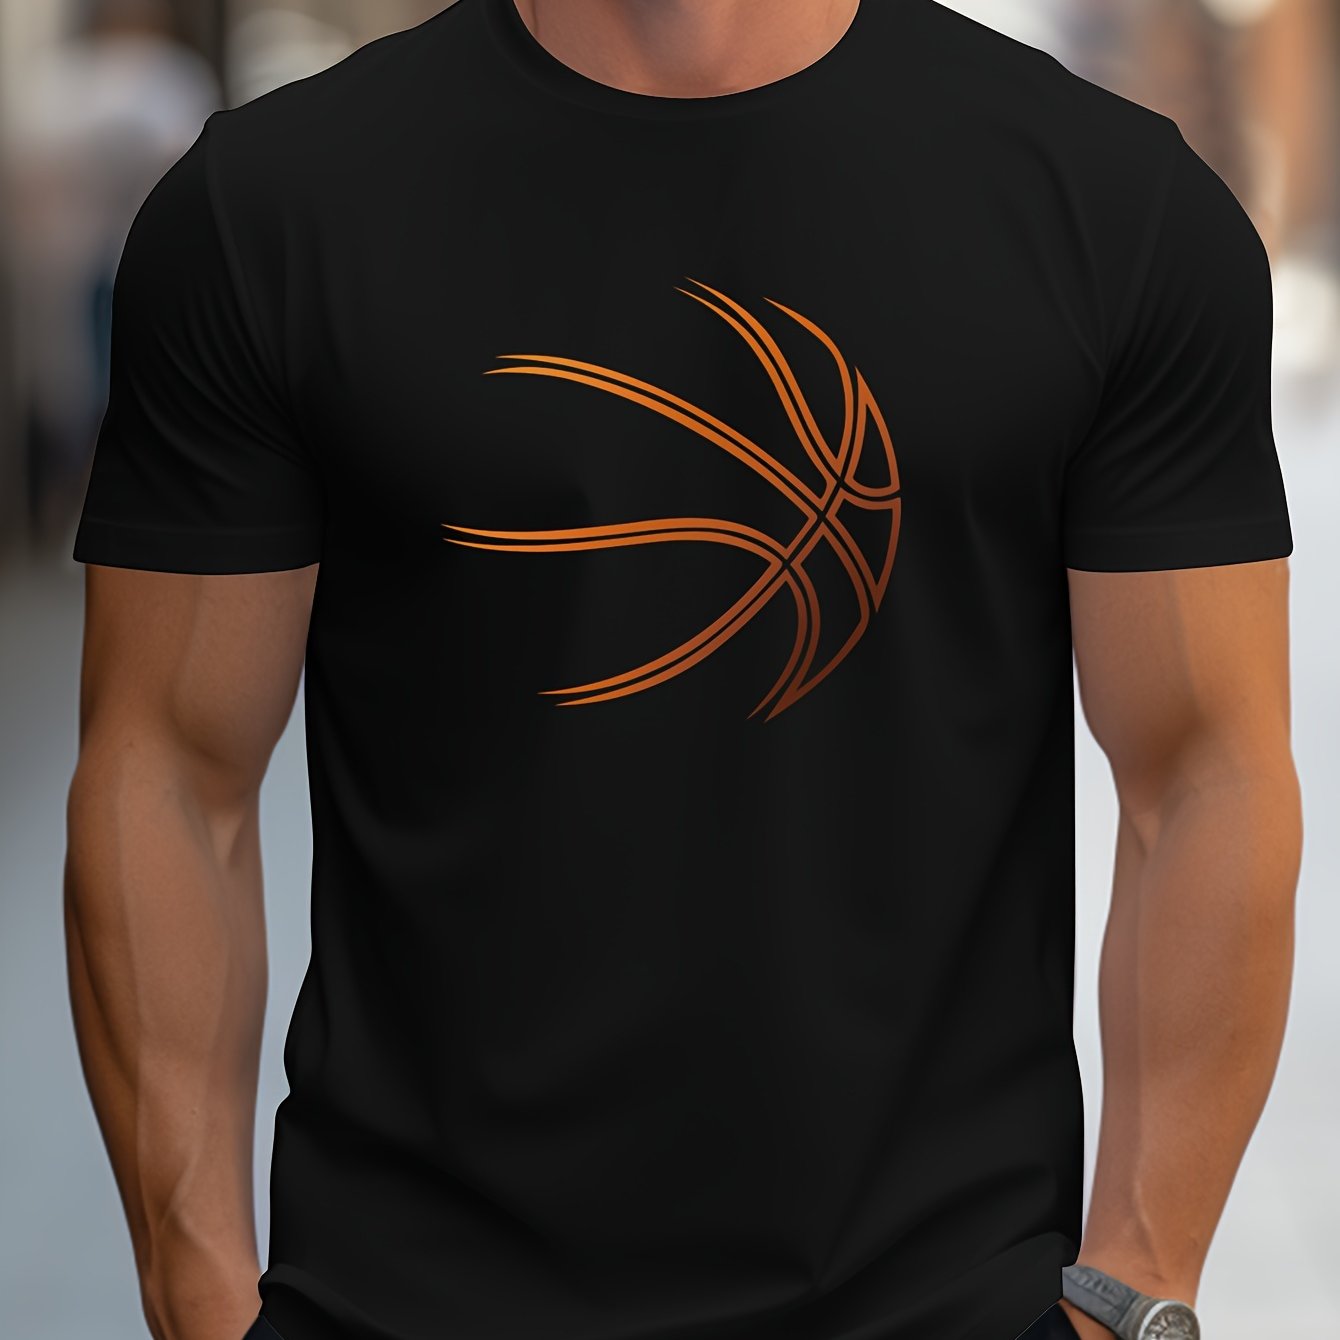 Basketball Graphic Print Men's Creative Top, Casual Short Sleeve Crew Neck T-shirt, Men's Clothing For Summer Outdoor